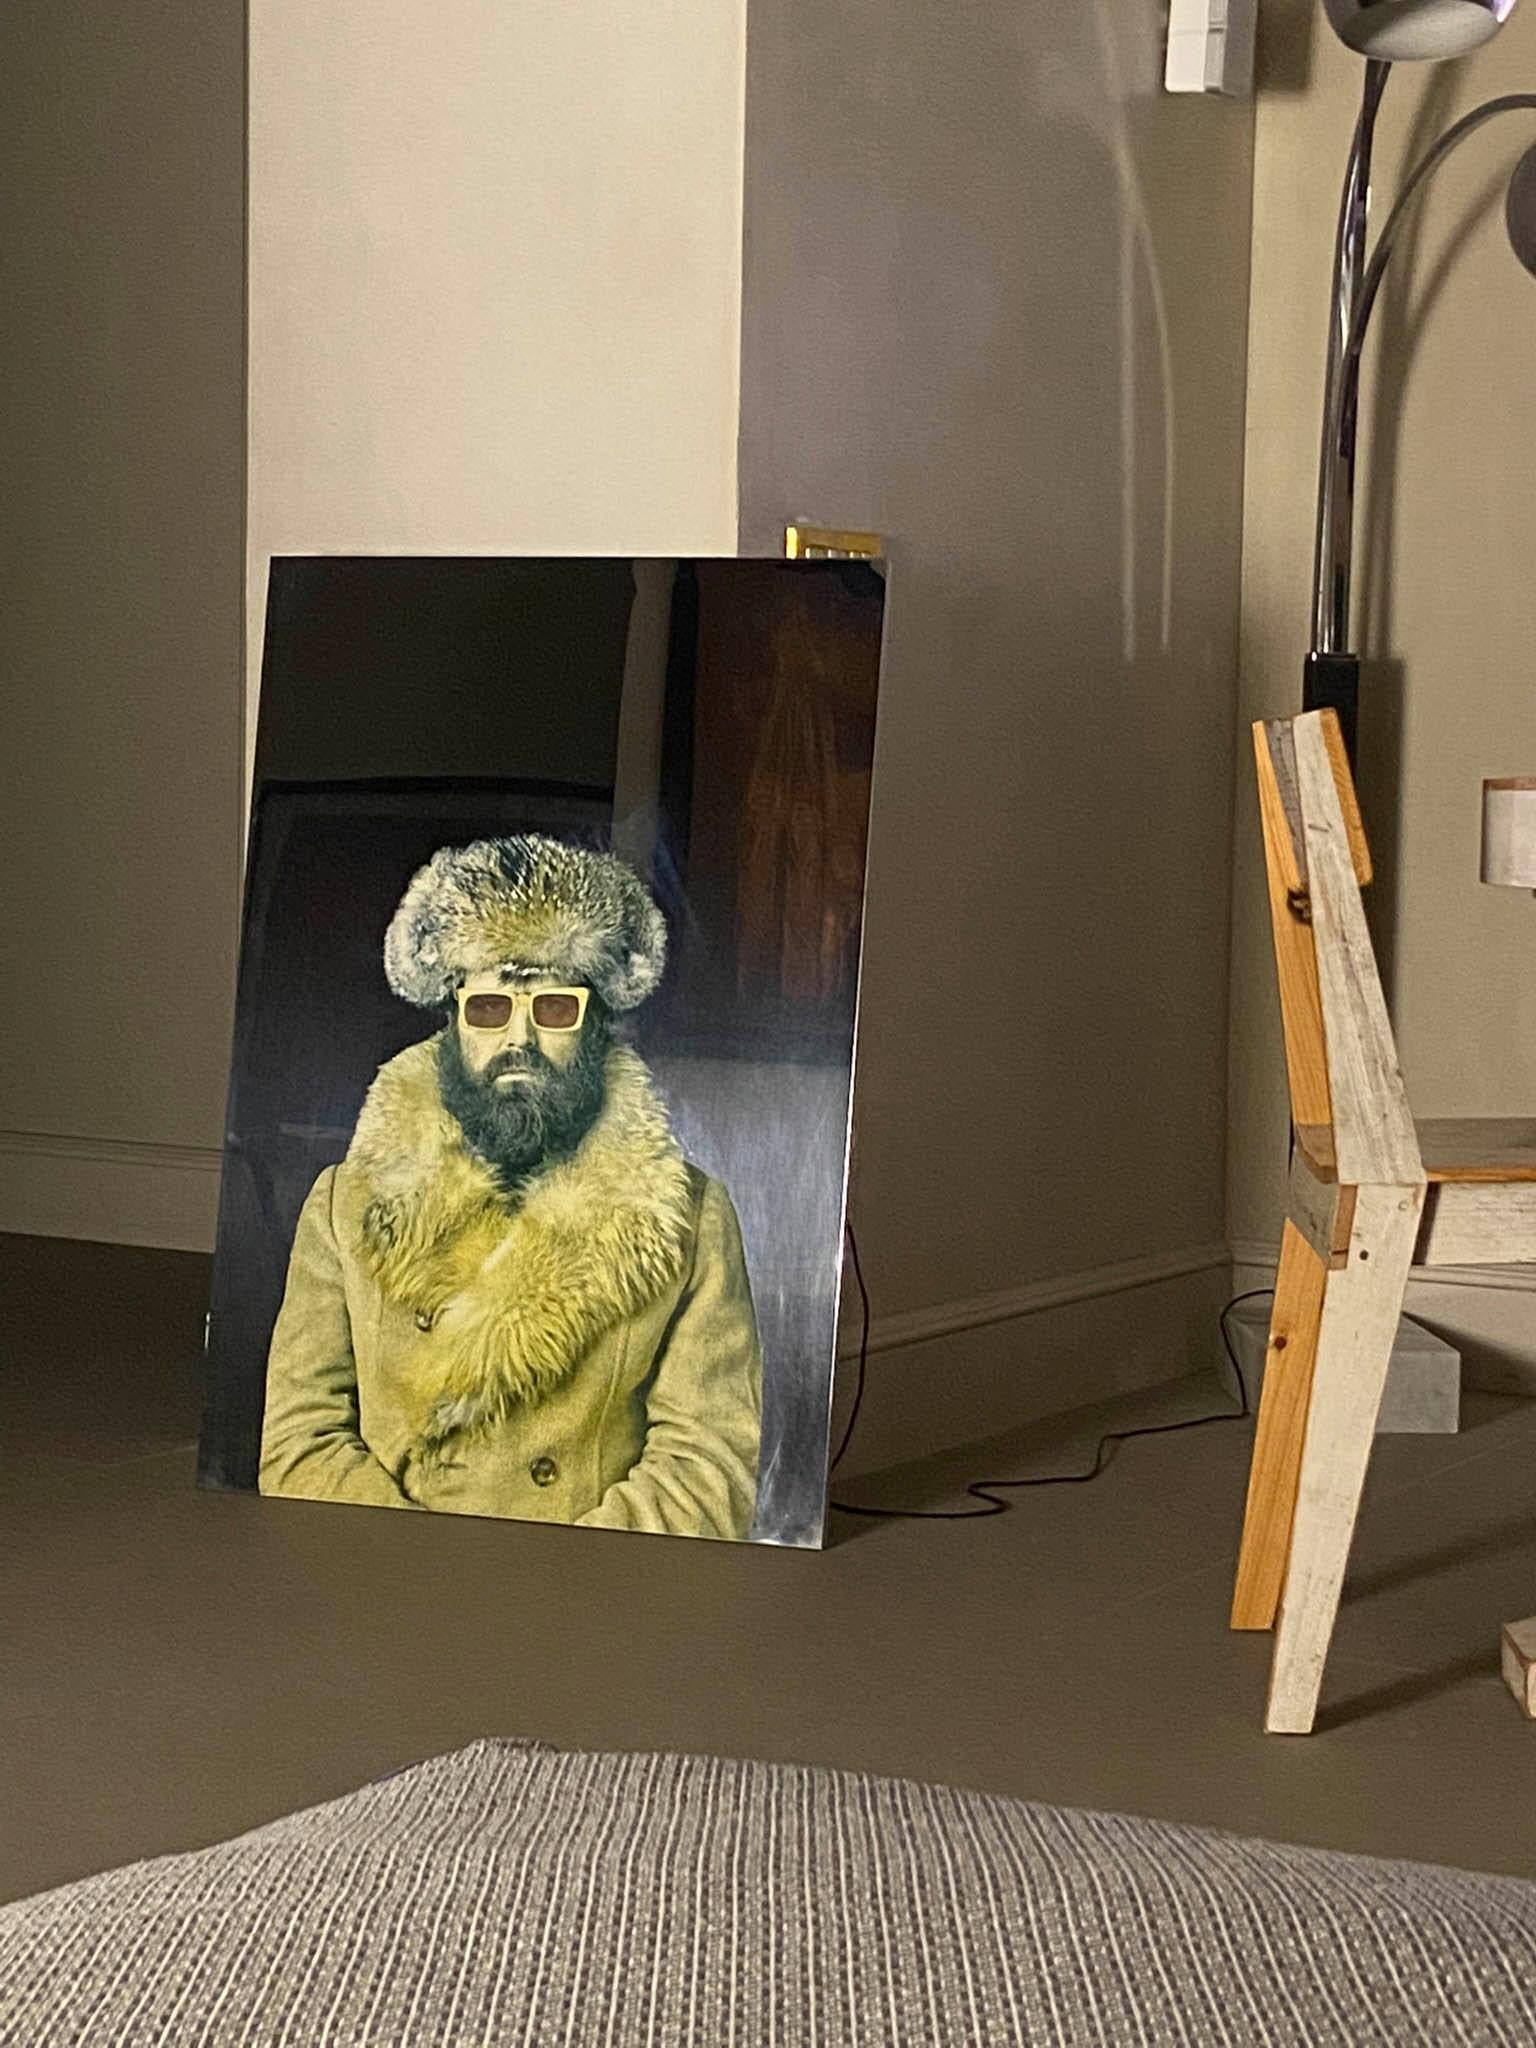 Self-Portrait with Yellow Glasses, Silkscreen on polished stainless steel - Conceptual Print by Michelangelo Pistoletto